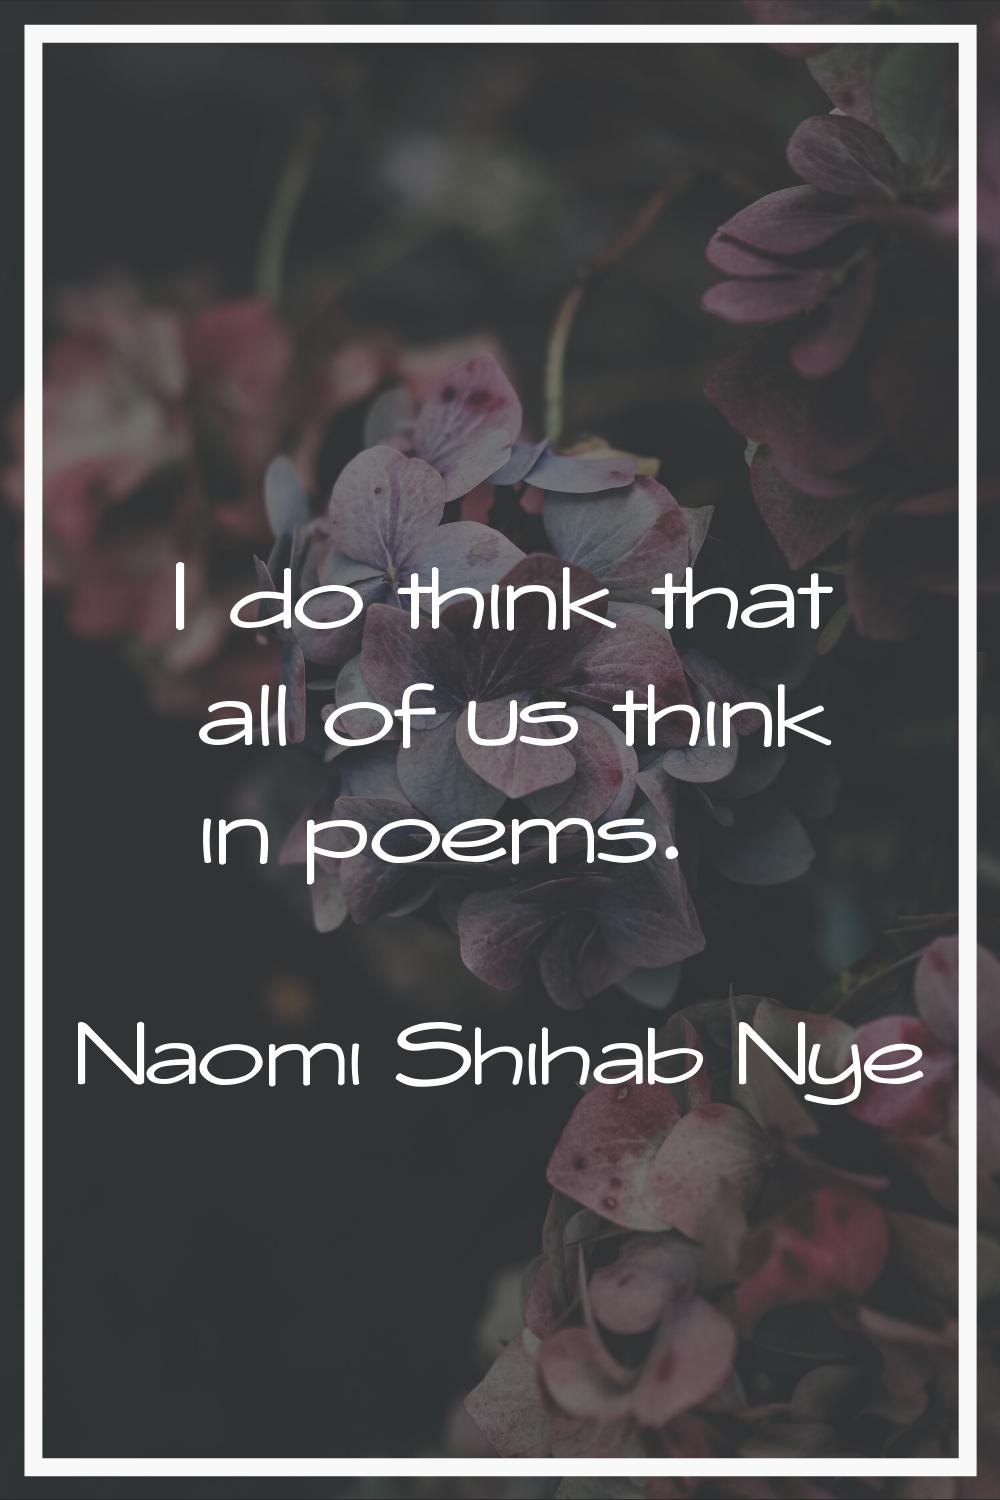 I do think that all of us think in poems.